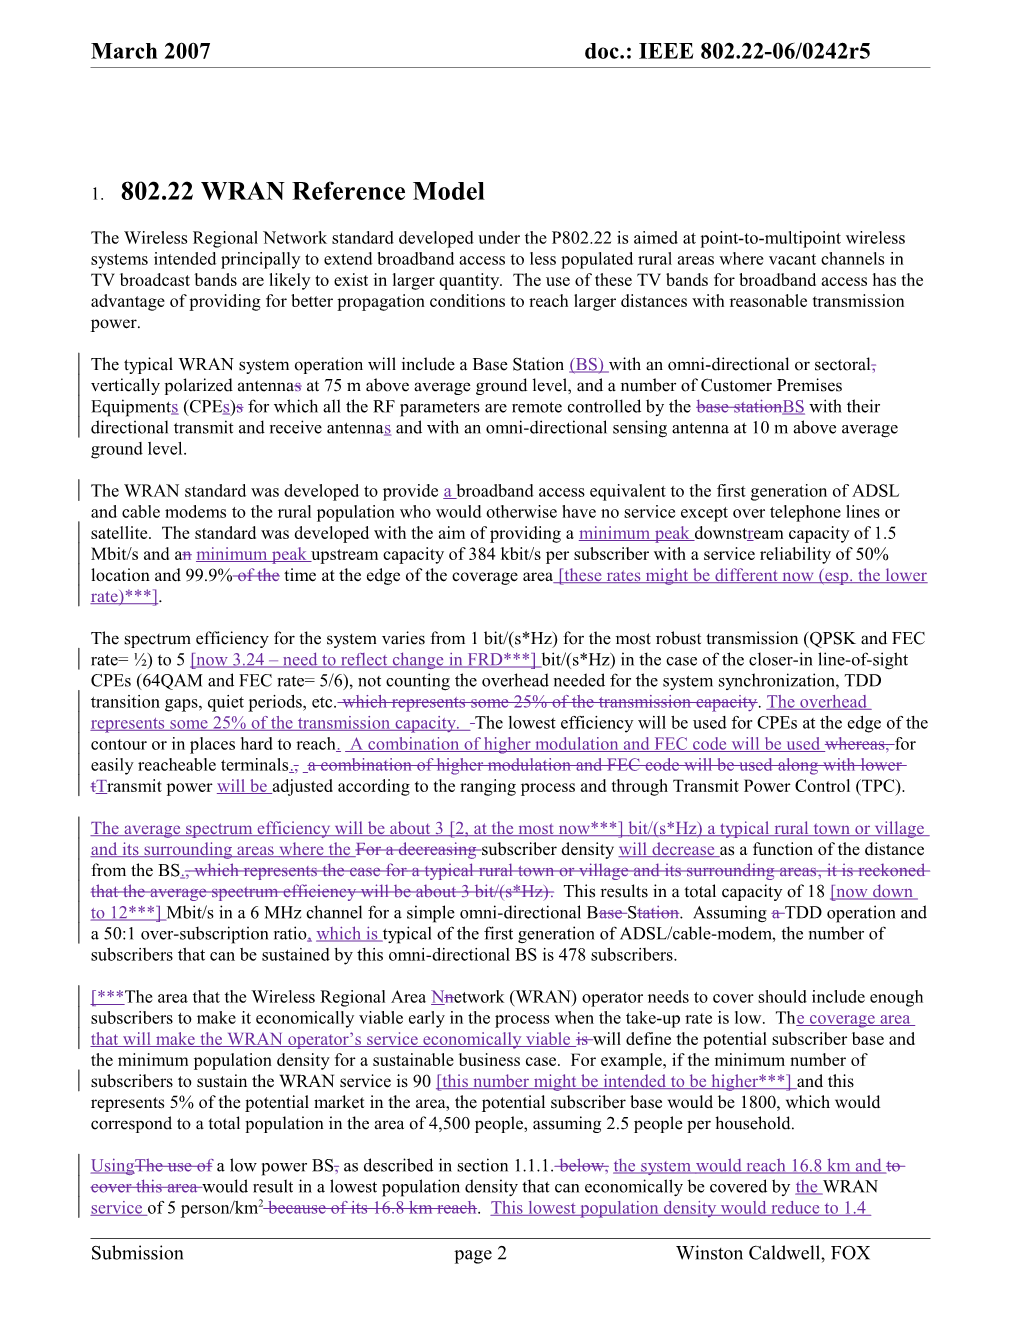 1.802.22 WRAN Reference Model